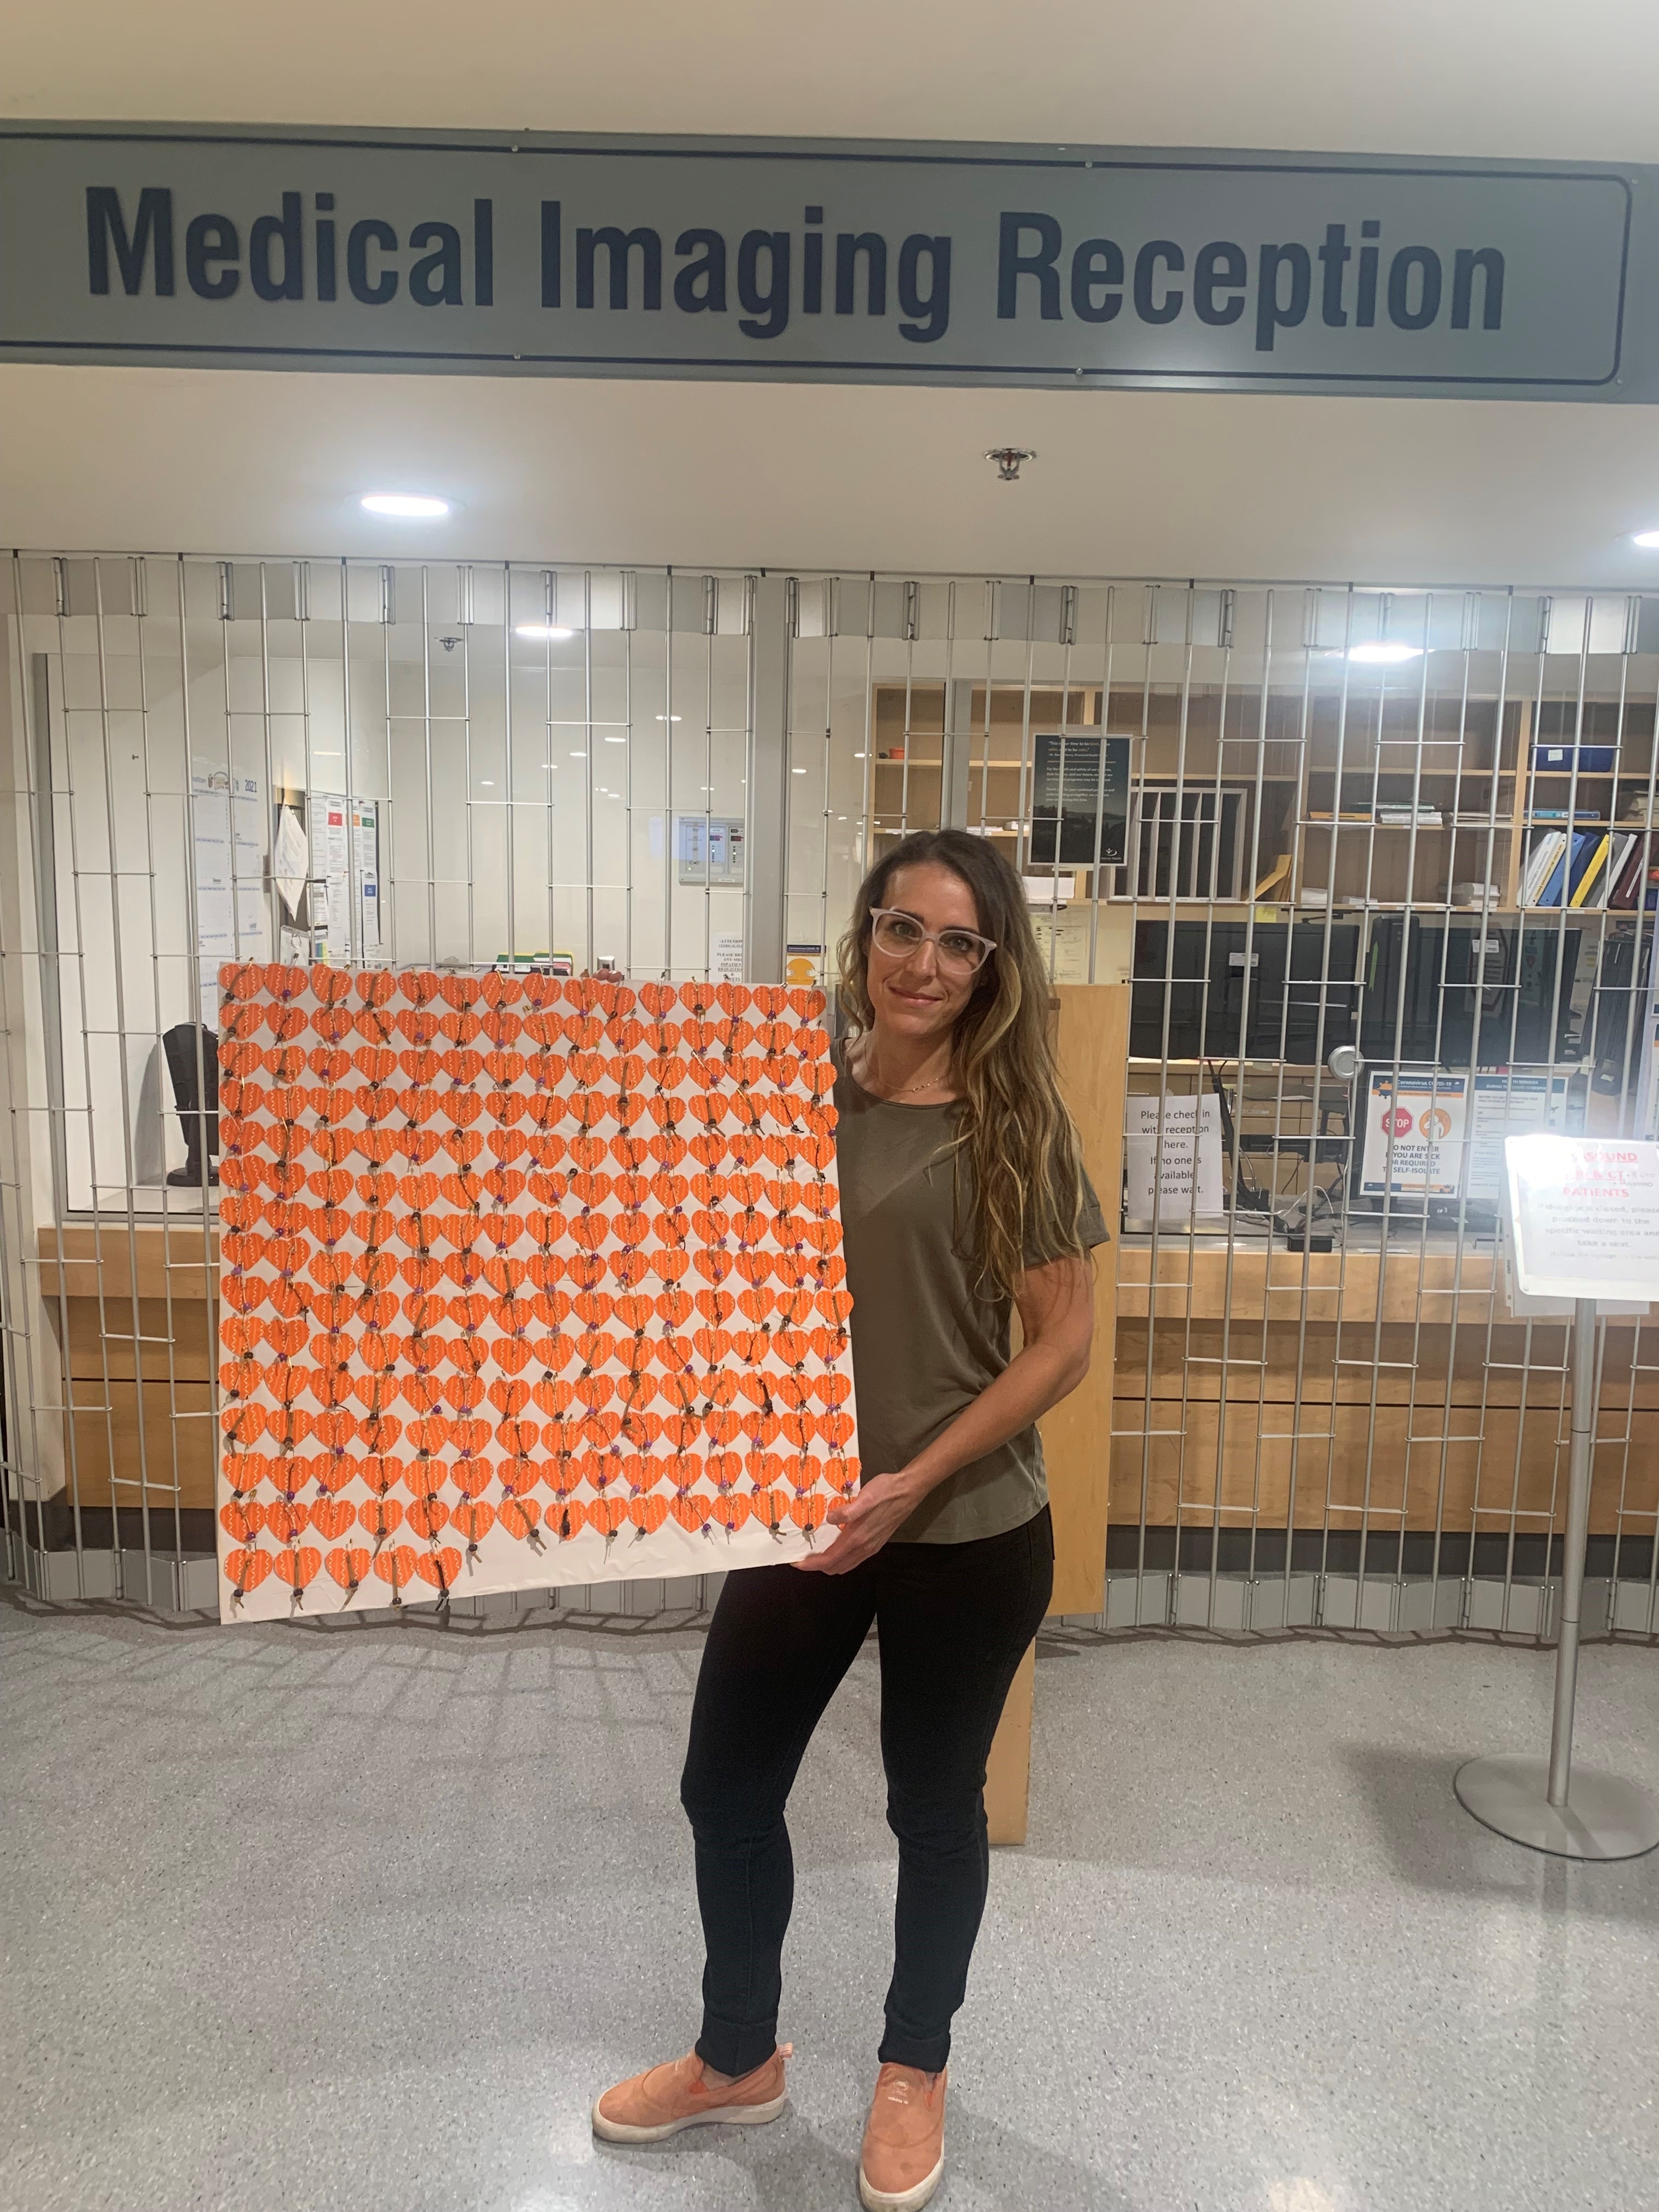 A long haired brunette wearing glasses holds up a poster with many small orange hearts on it in the reception area of the Medical Imaging department at the hospital 